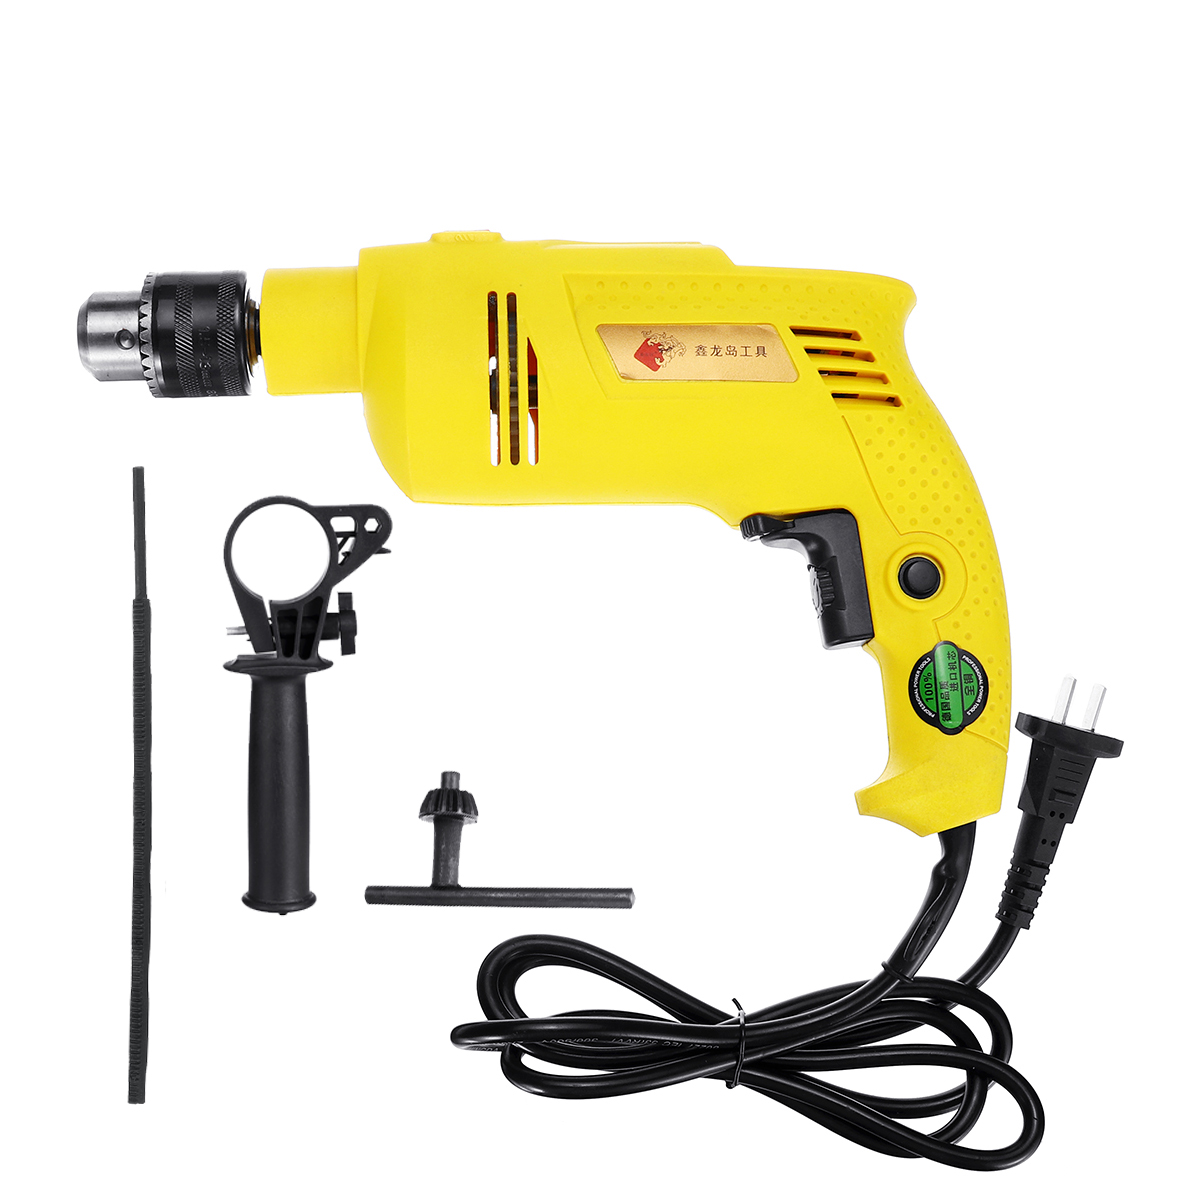 1980W-3800rpm-Electric-Impact-Drill-0-3800rmin-Electric-Drill-Five-Axes-Linkage-Power-Drills-Powerfu-1468497-7